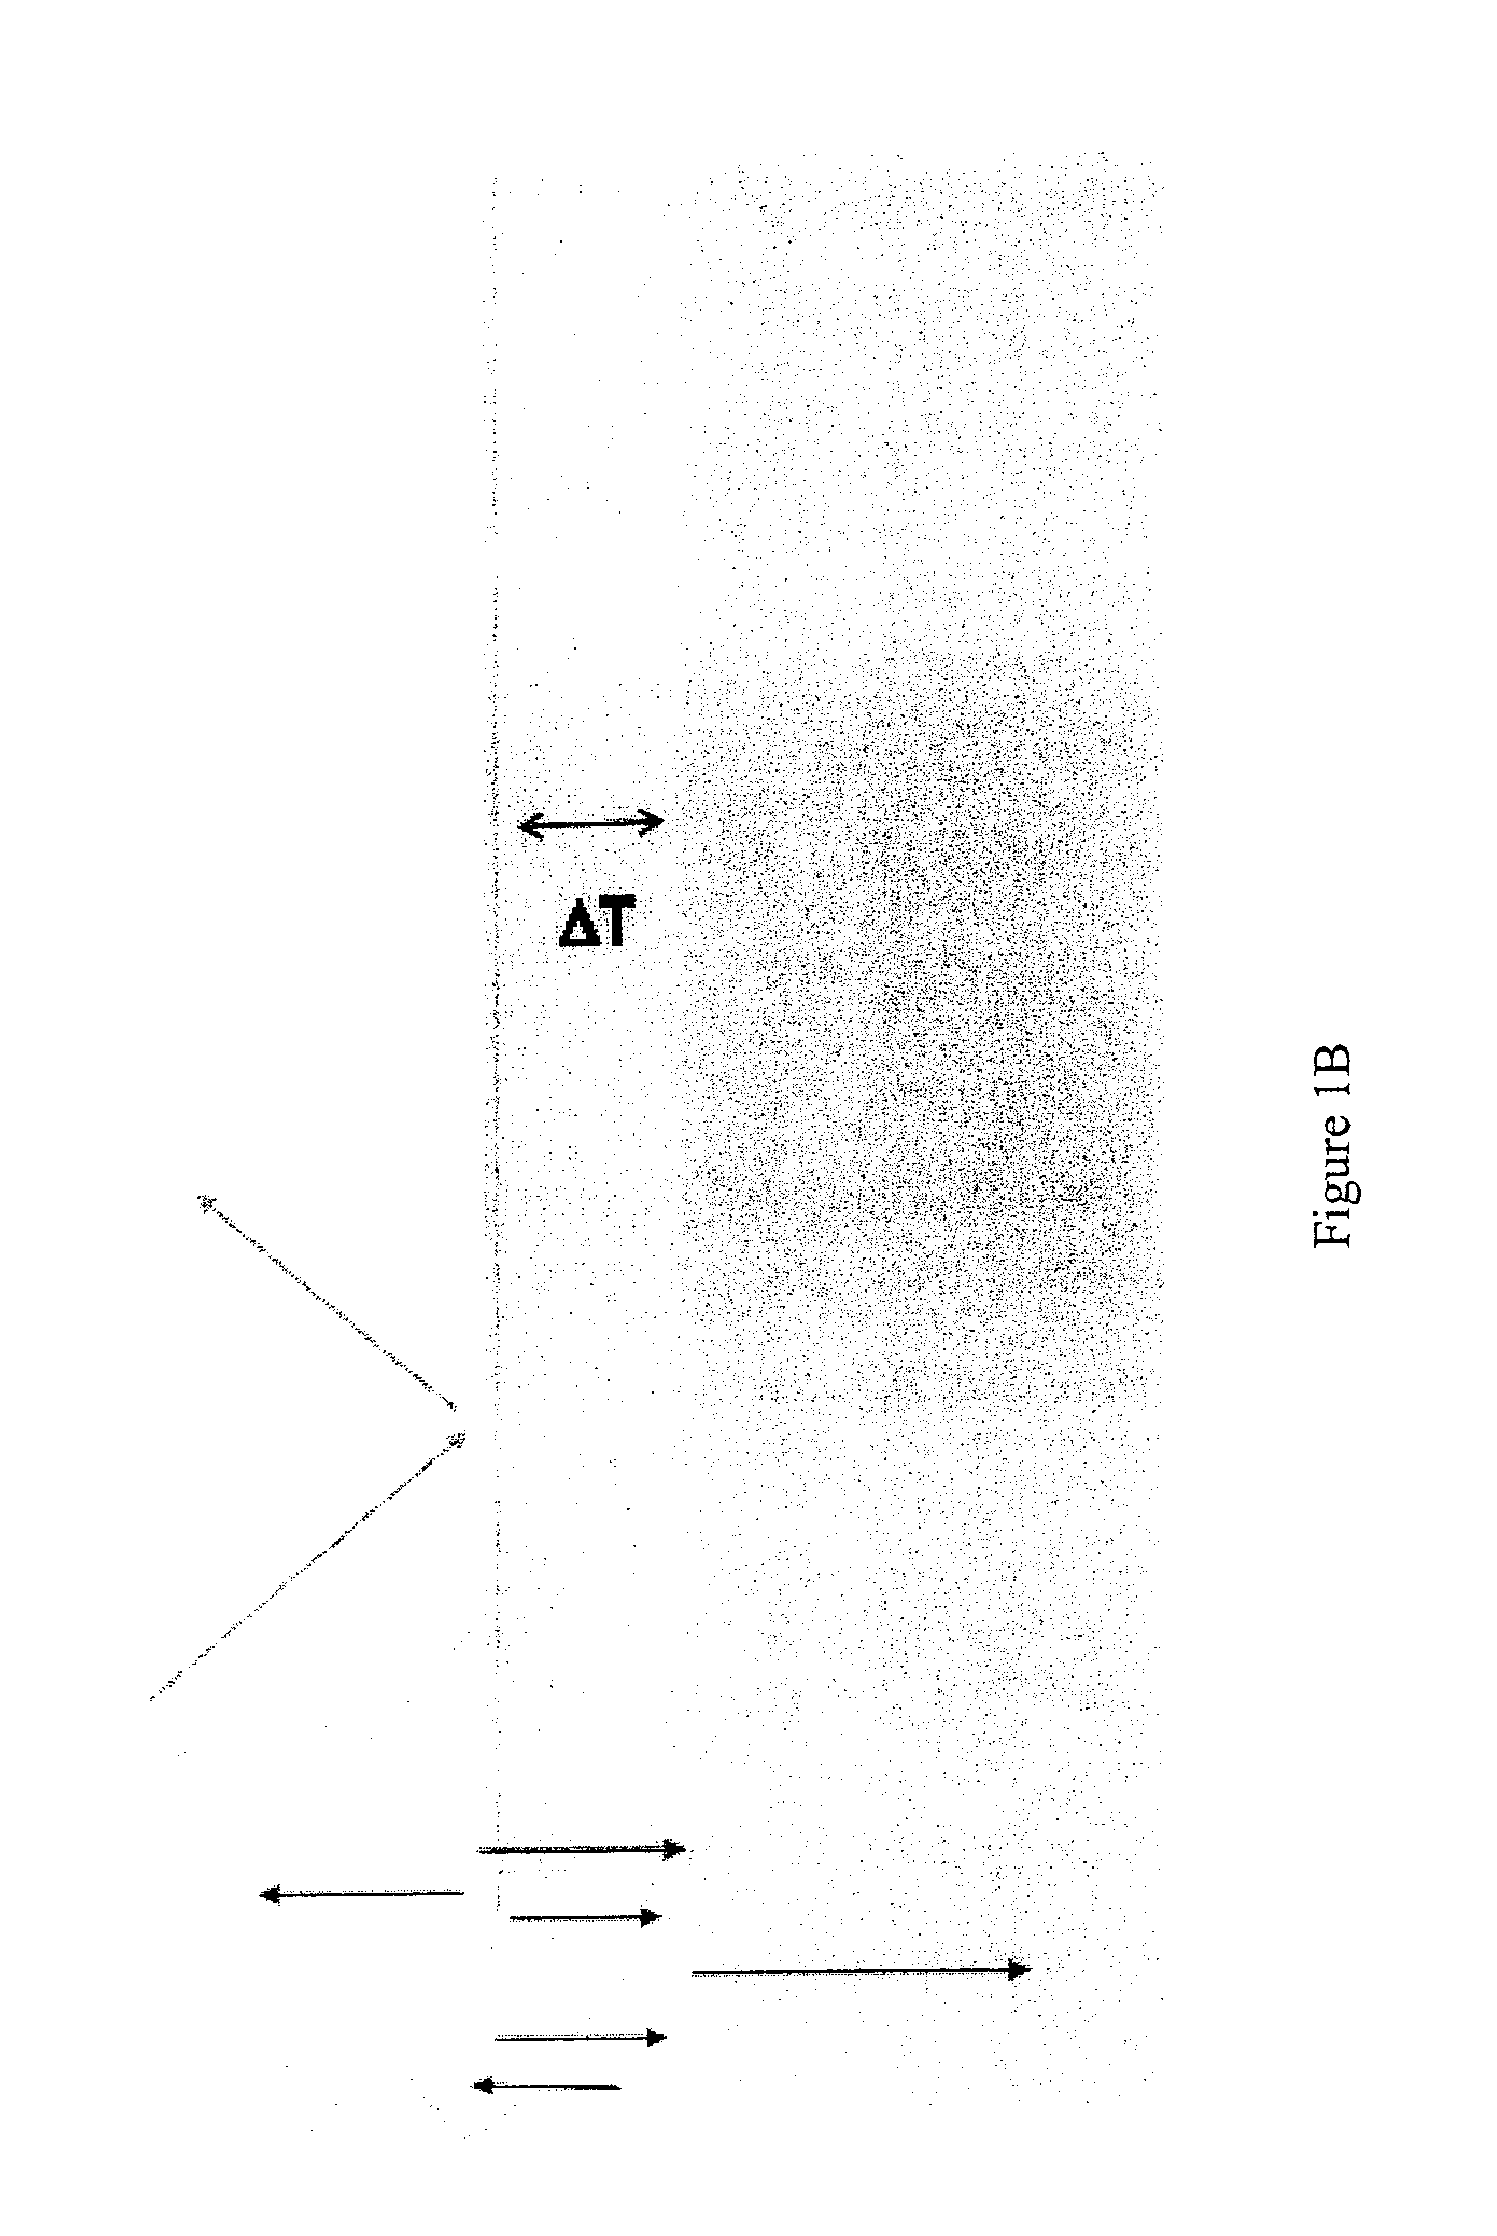 Methods for environmental modification with climate control materials and coverings